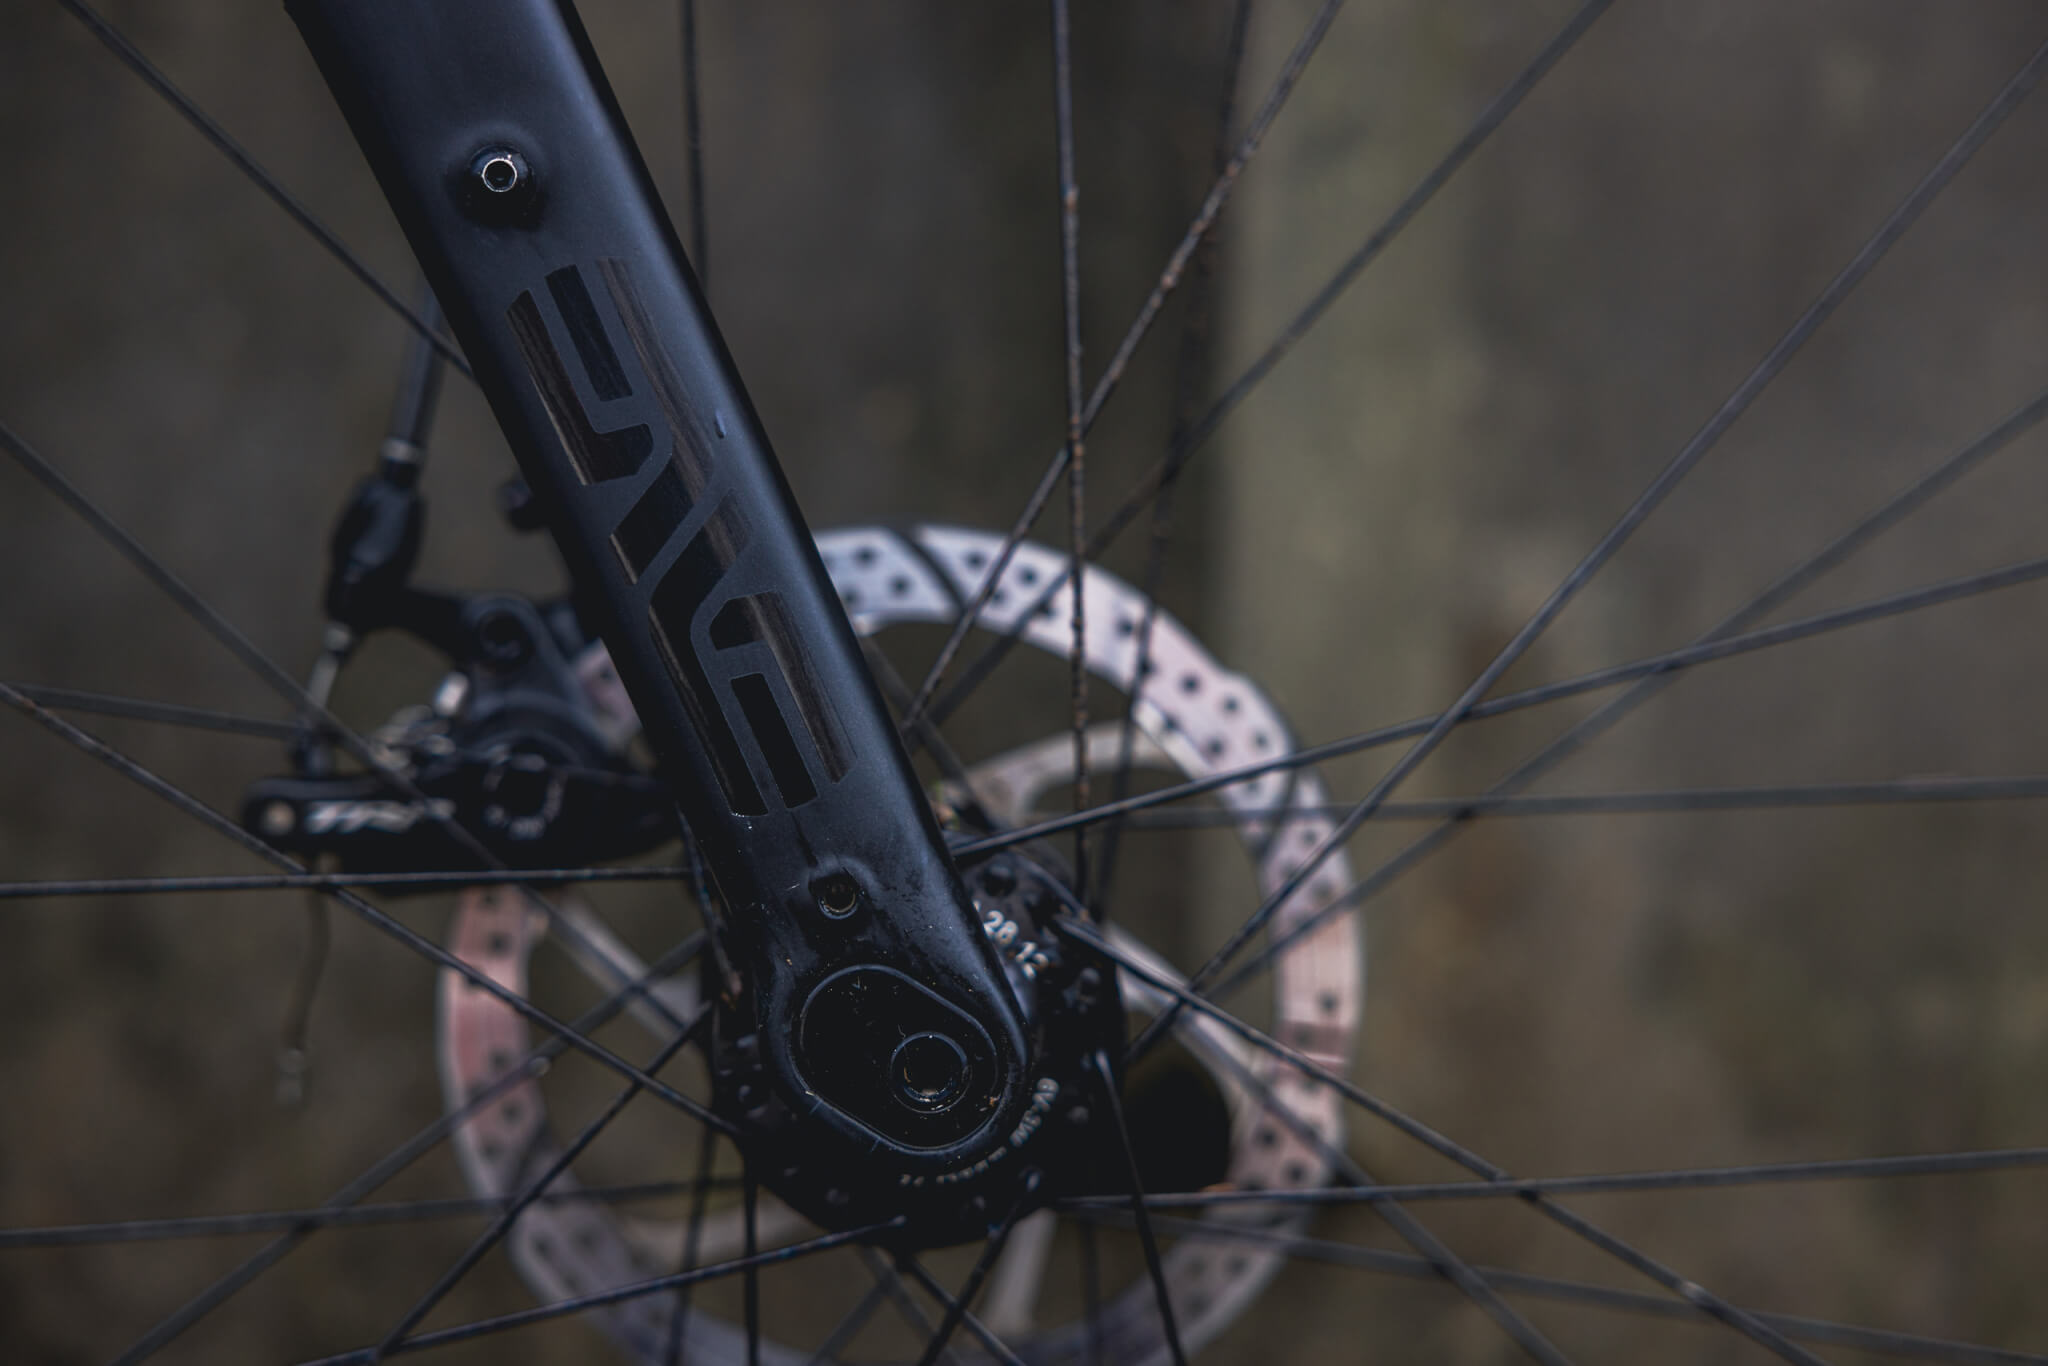 Enve adventure fork review 9 | lifecycle magazine